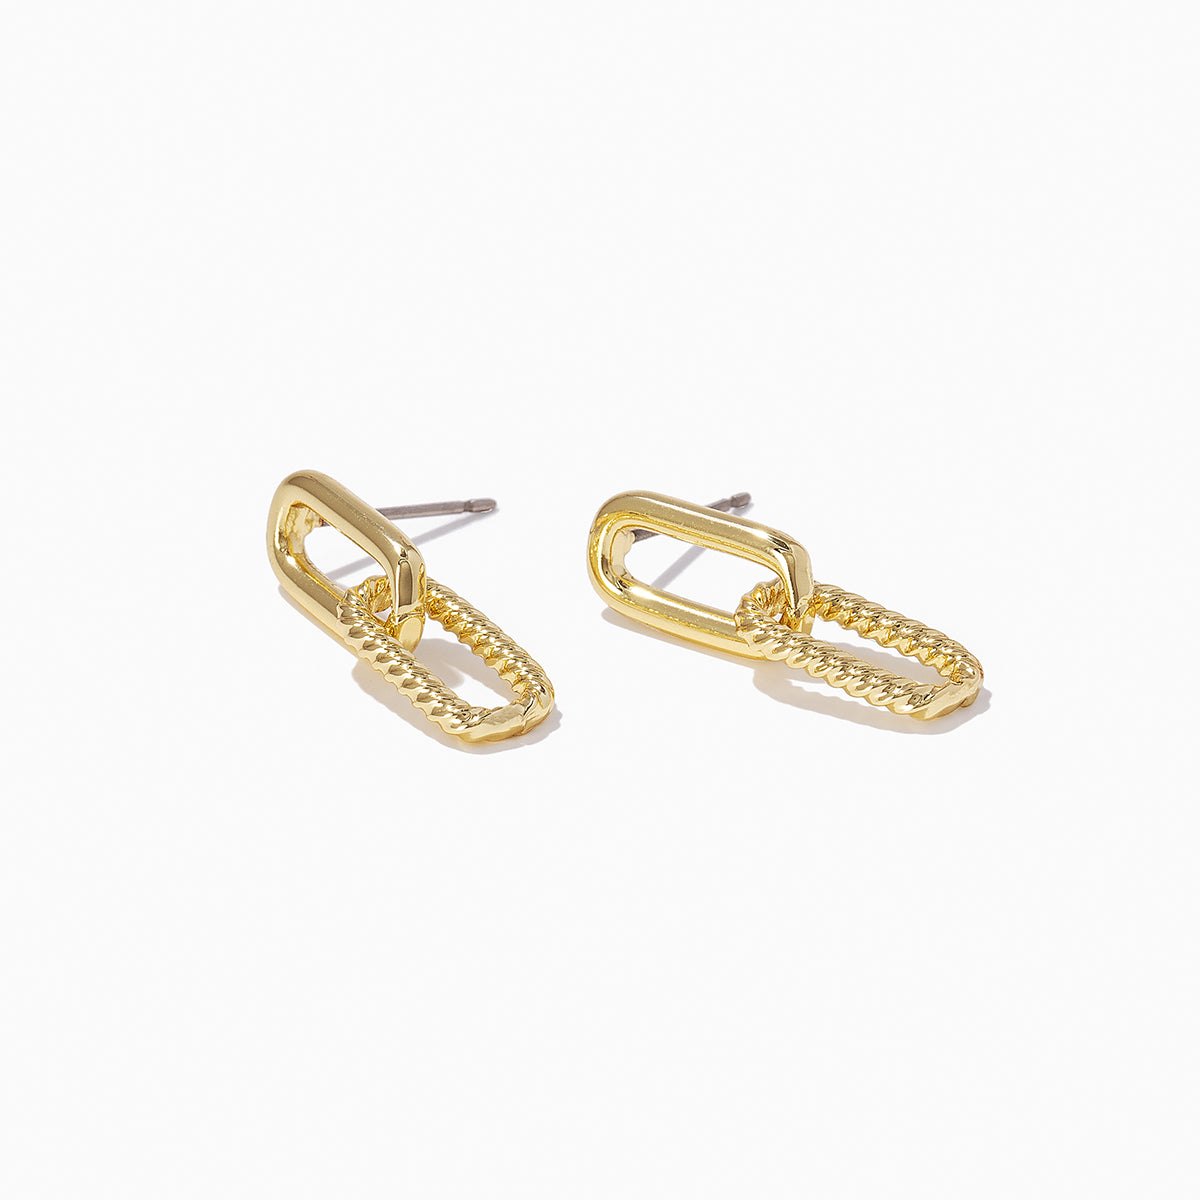 Linked Chain Earrings | Gold | Product Detail Image | Uncommon James